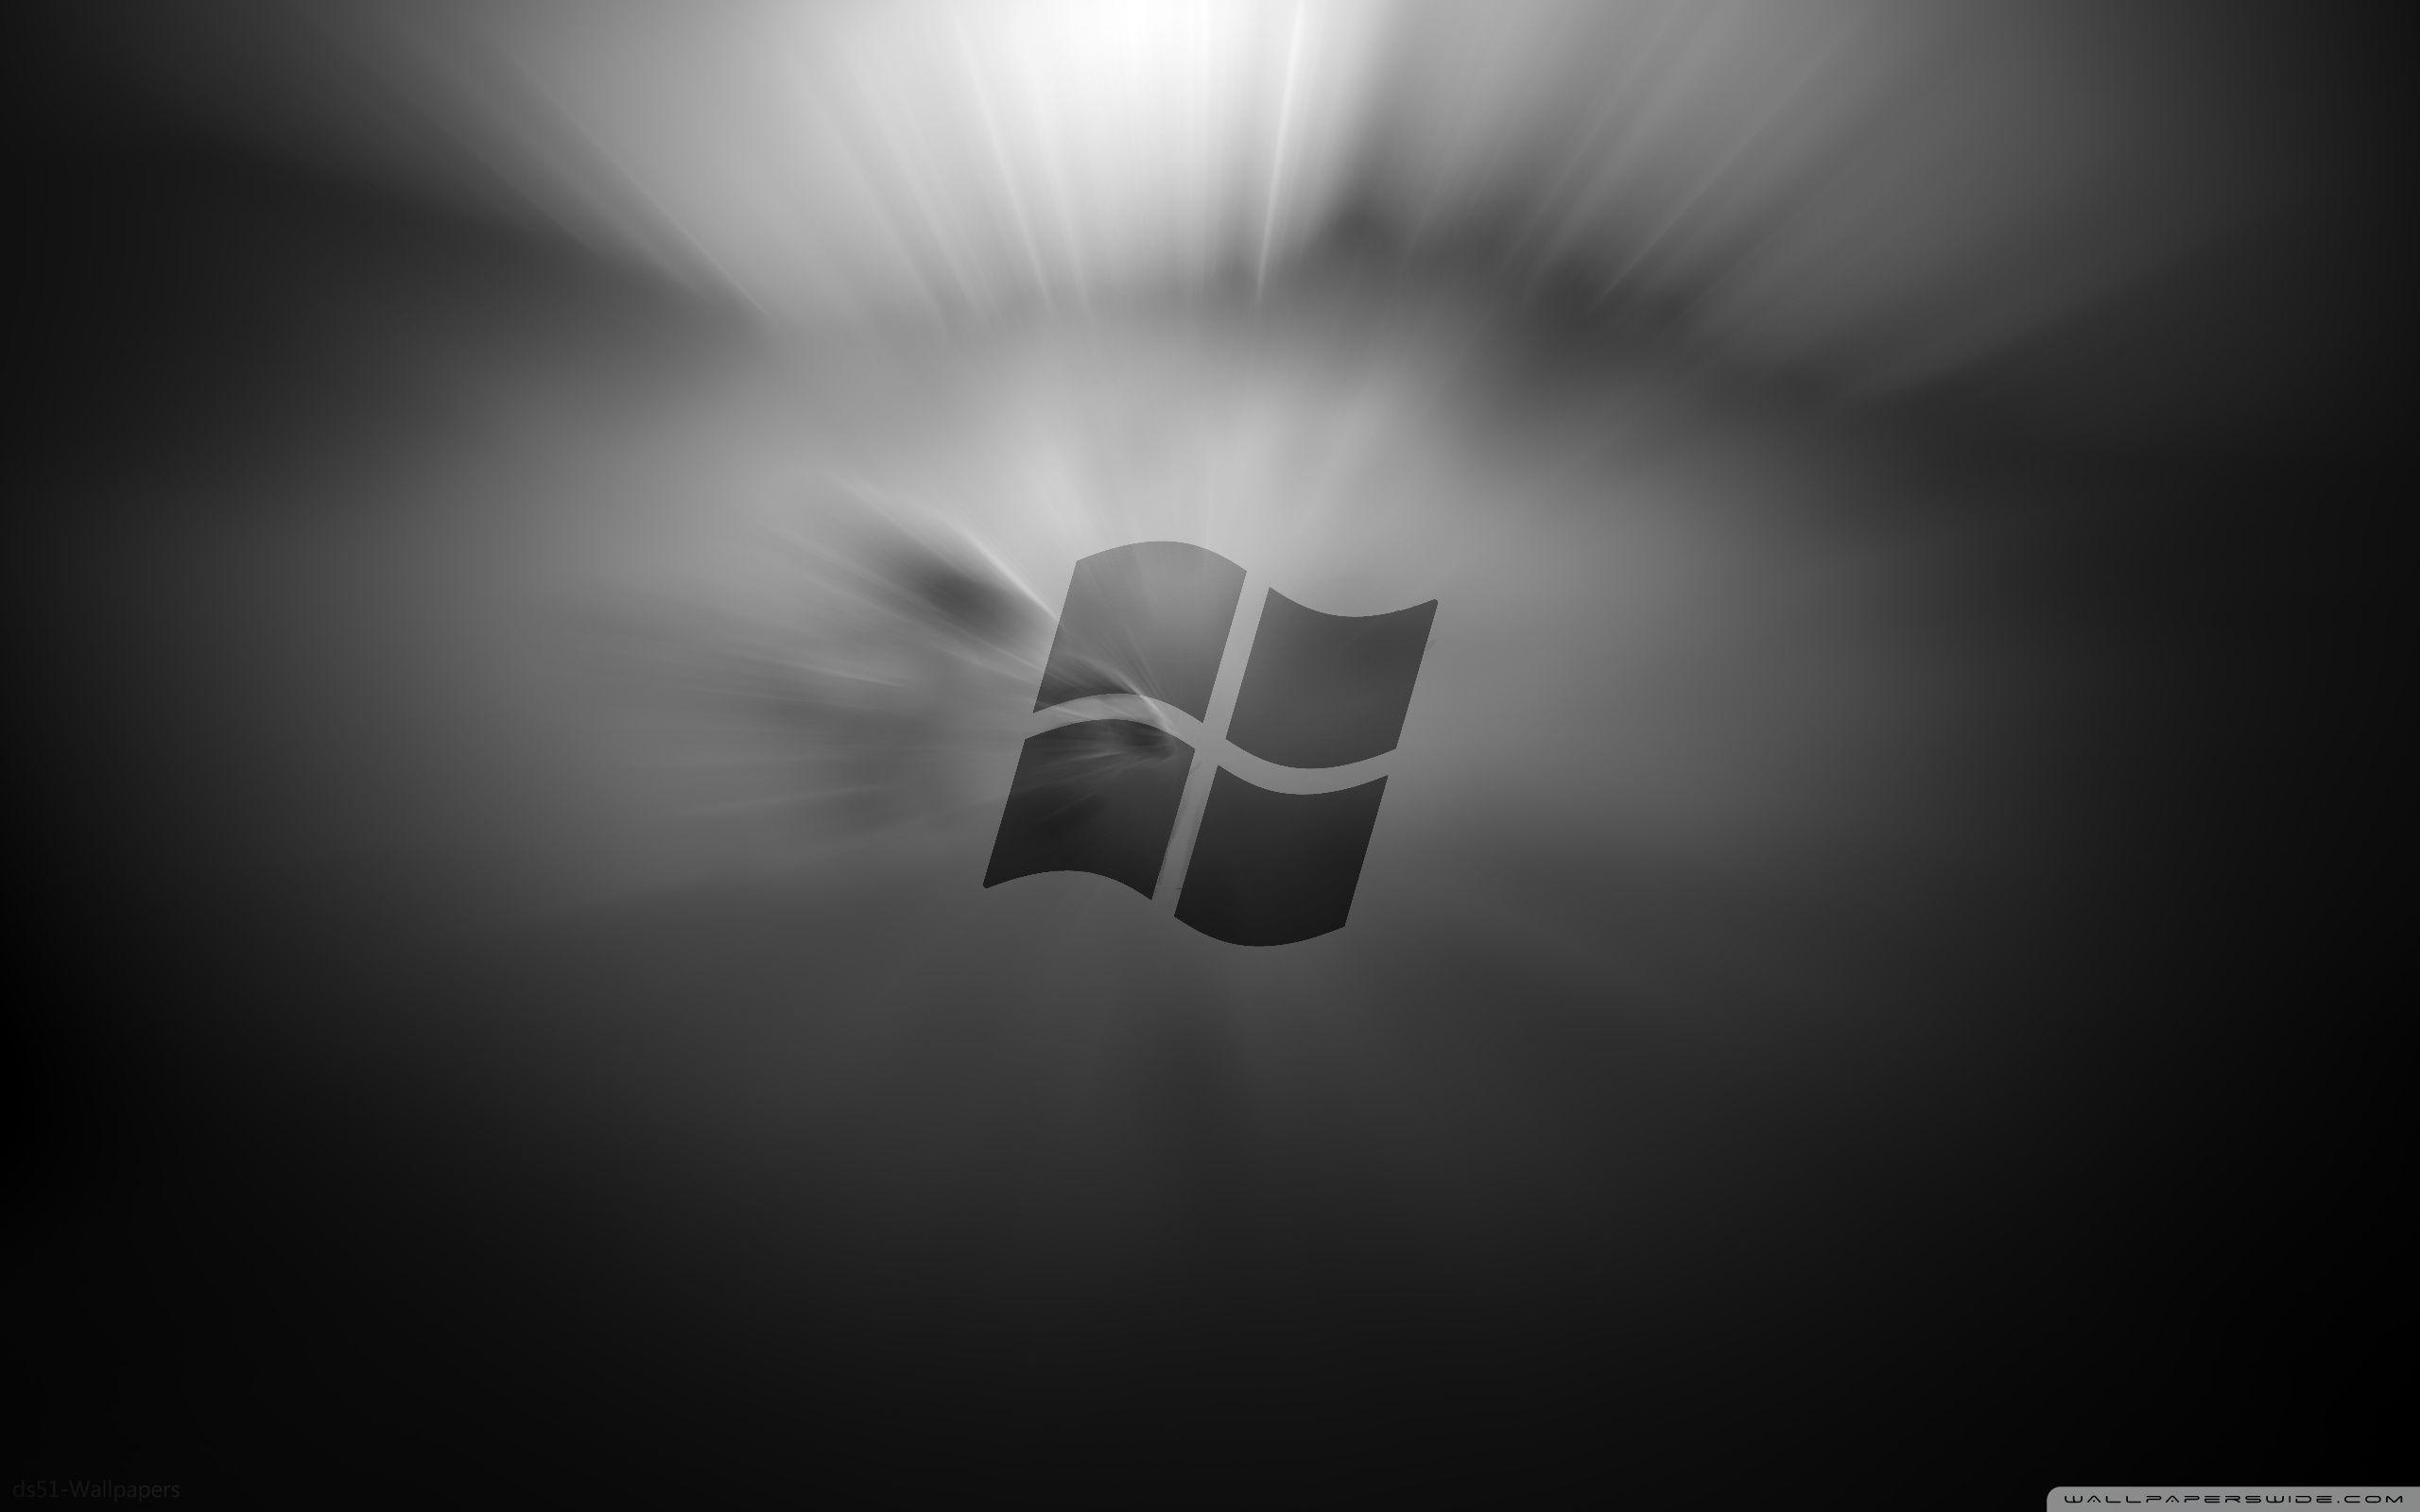 Windows Server 2016 Backgrounds - Wallpaper Cave Full Hd Wallpapers For Windows 8 1920x1080